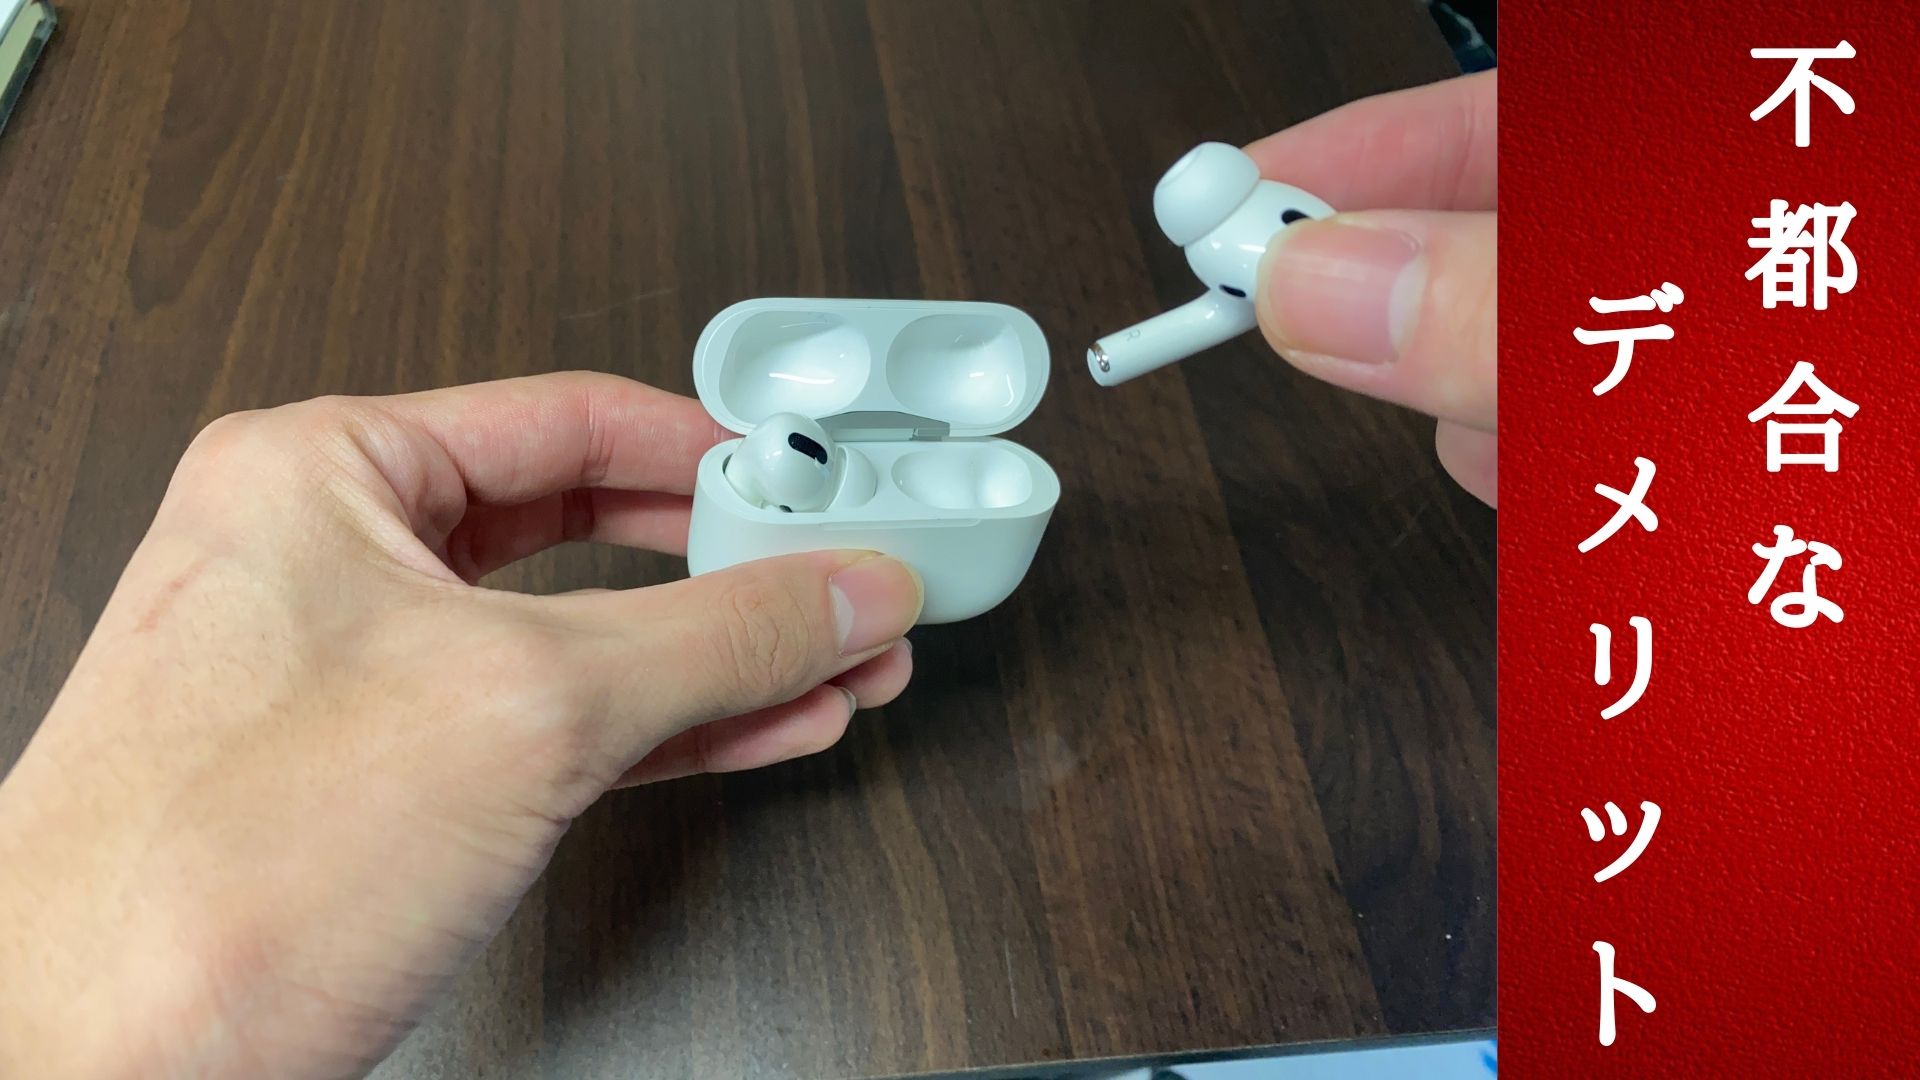 airpods pro　デメリット　だめ　悪い　